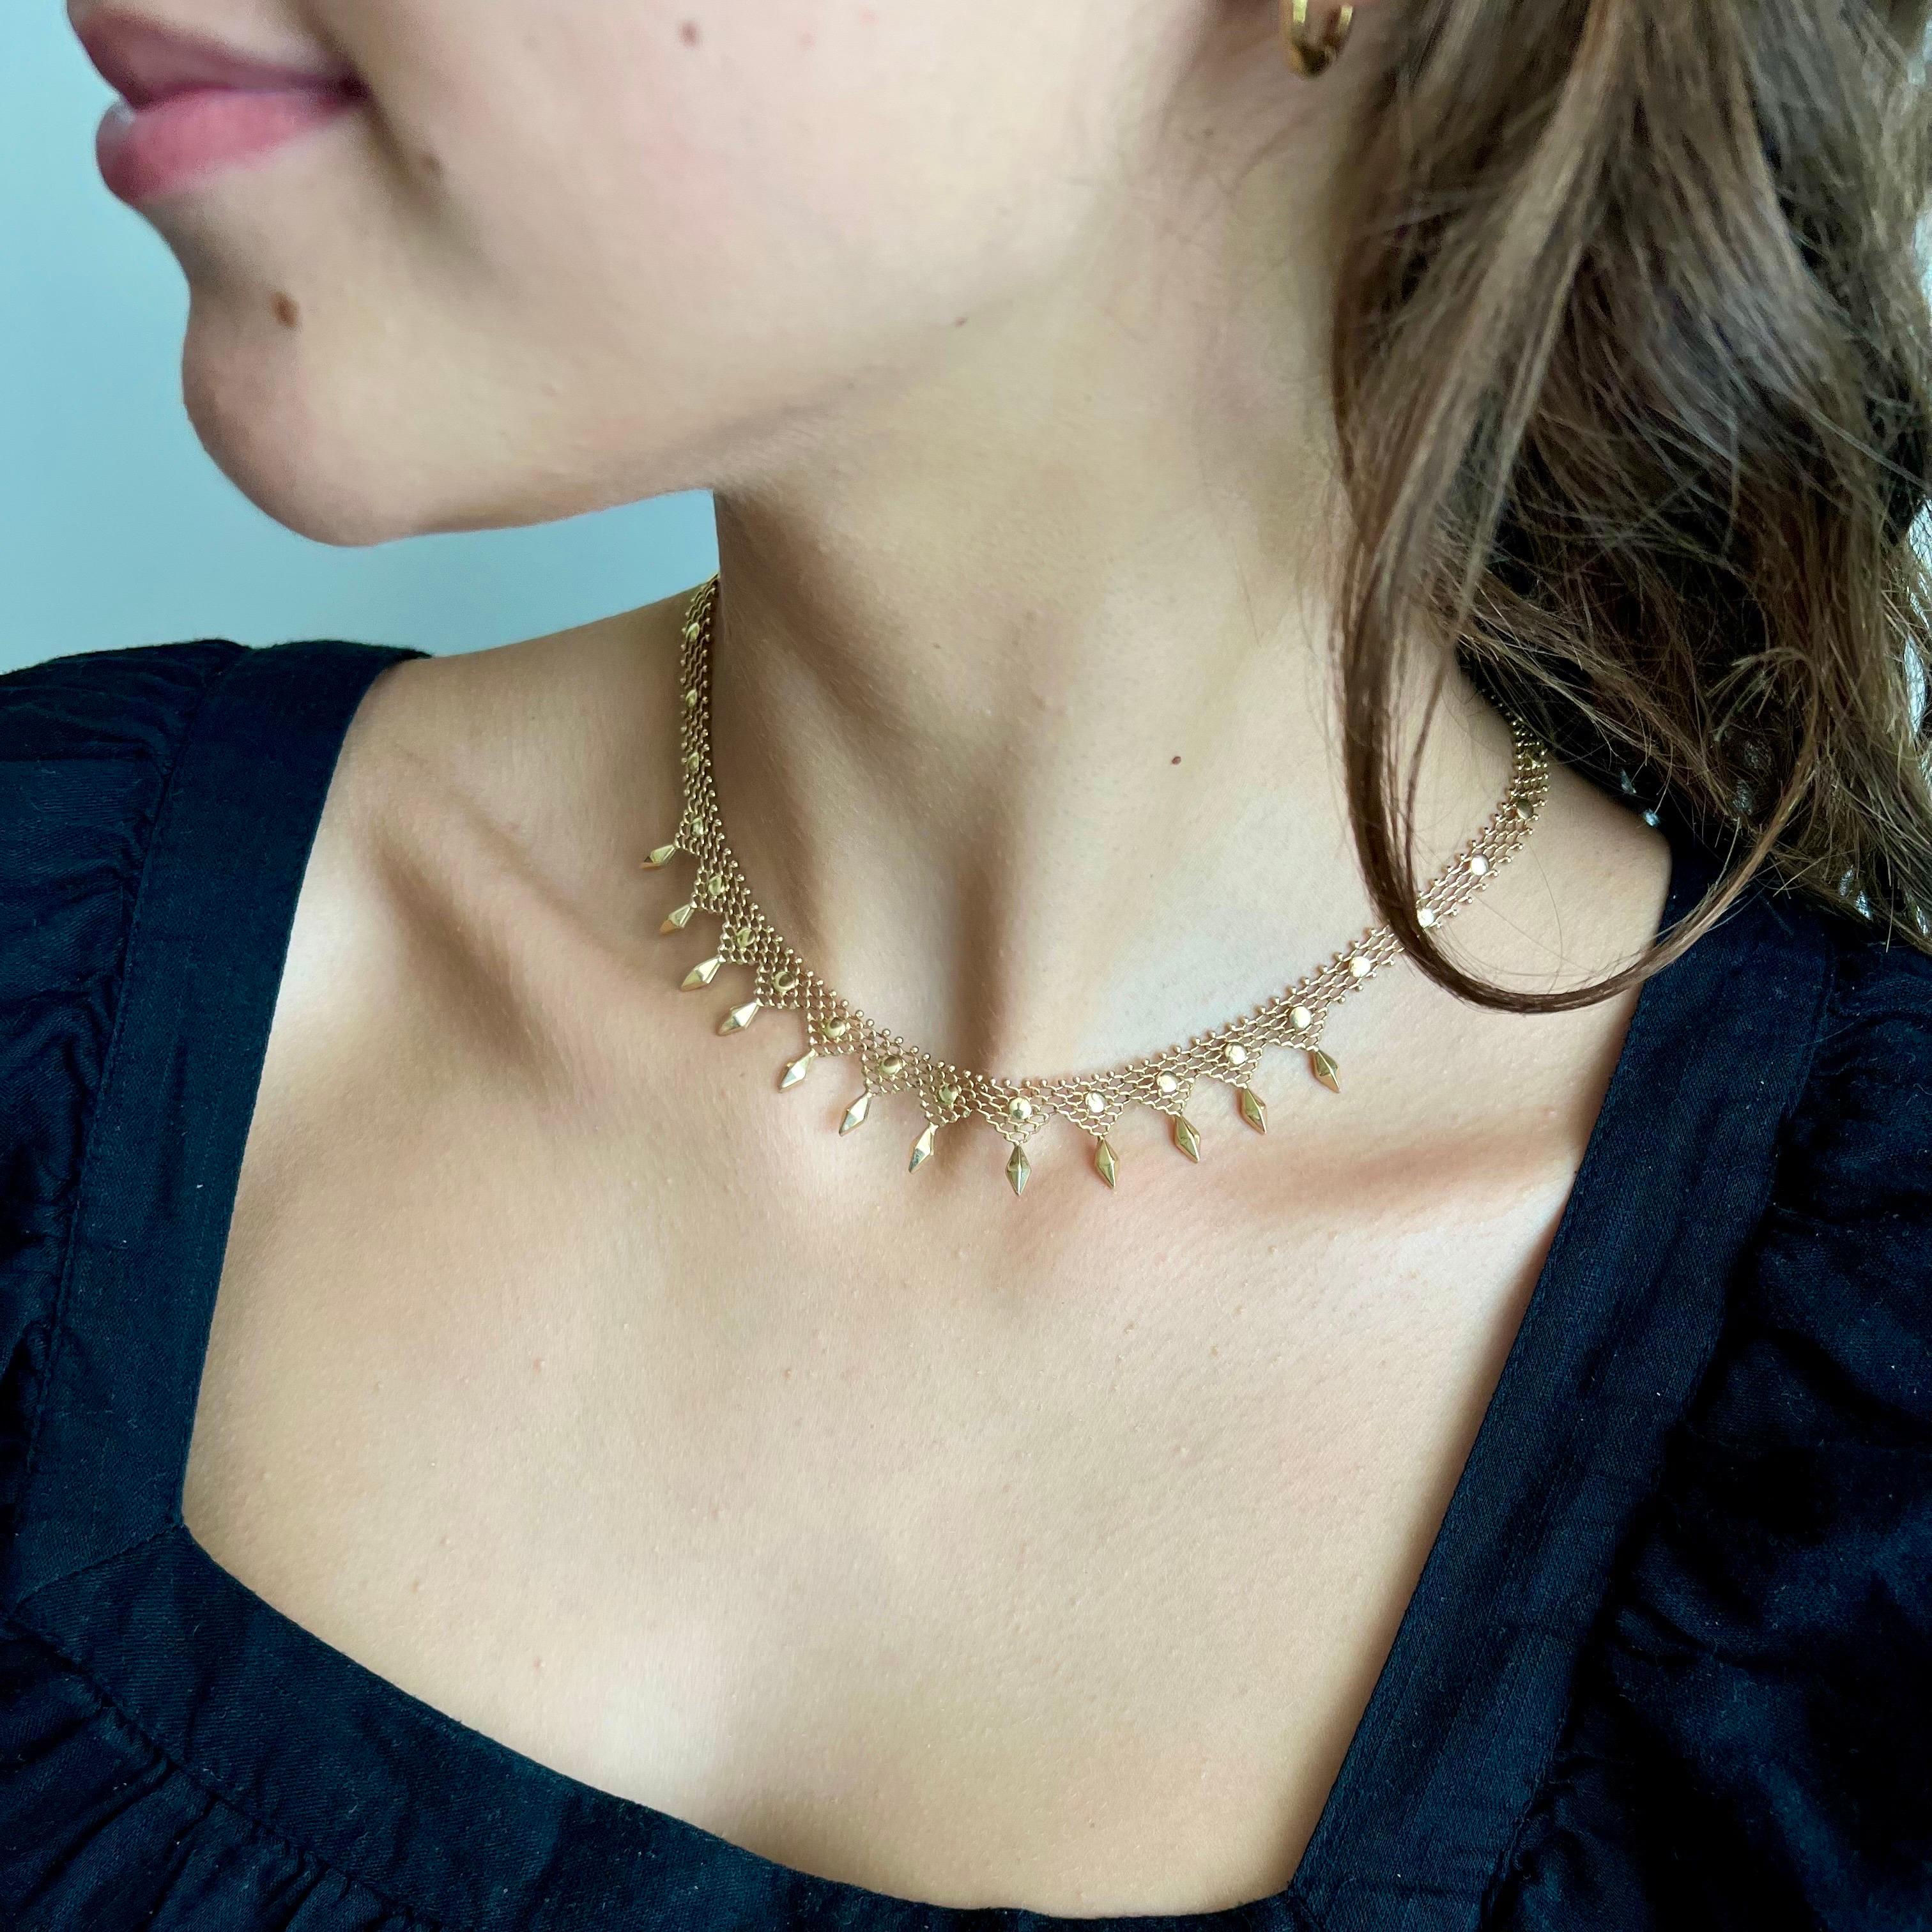 A timeless vintage woven choker chain necklace created in 14 karat gold. The chain of the necklace is beautifully made and represents twelve diamond-shaped figures and small balls on the side of the chain. The links are all nicely put together,